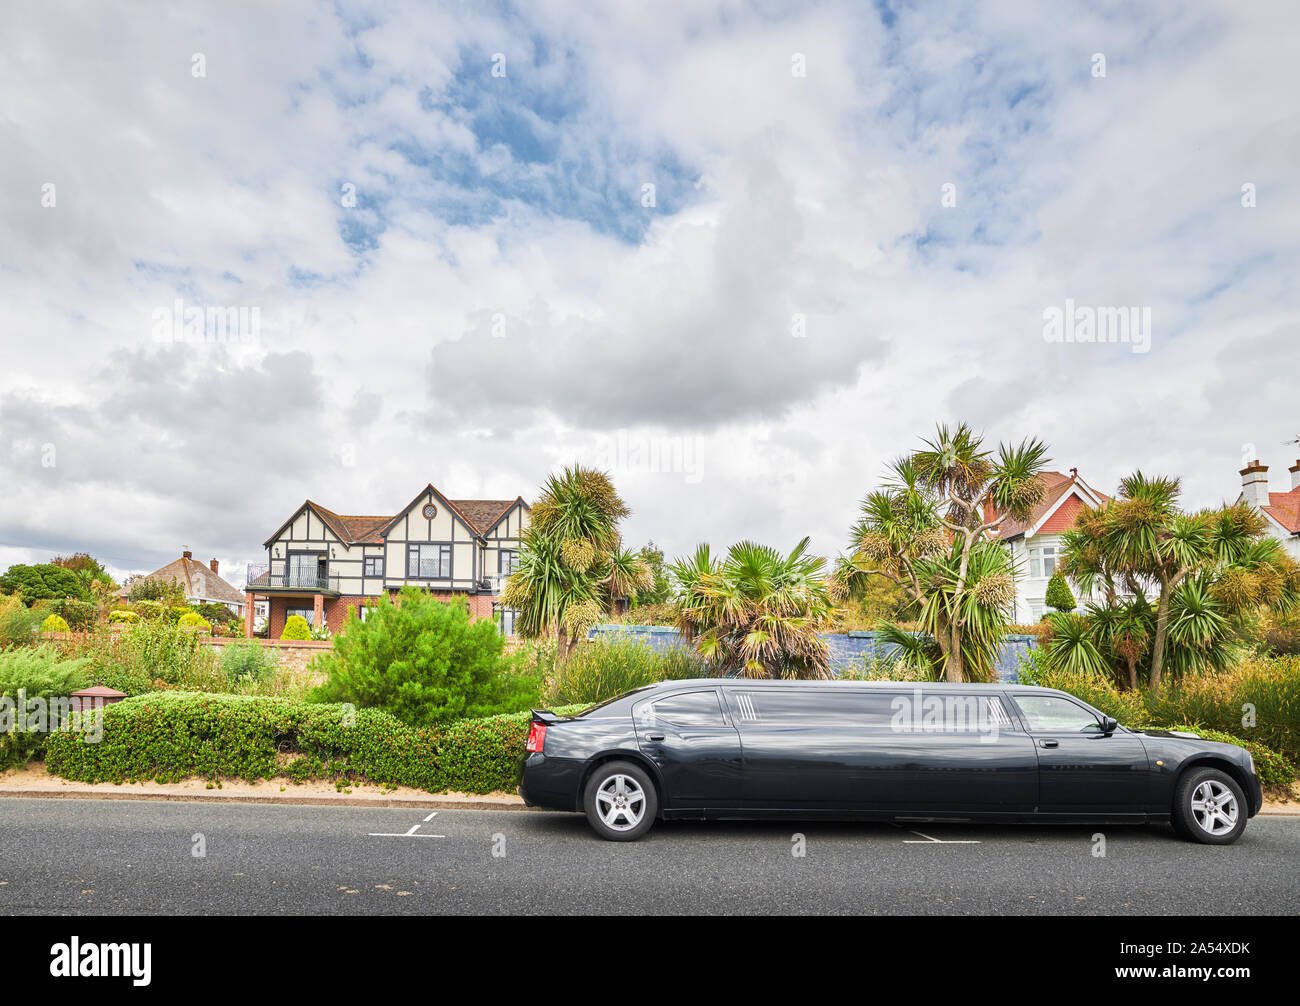 Stretch limo parked outisde a luxury home at Thorpe Bay, Southend-on-sea, Essex, England. Stock Photo